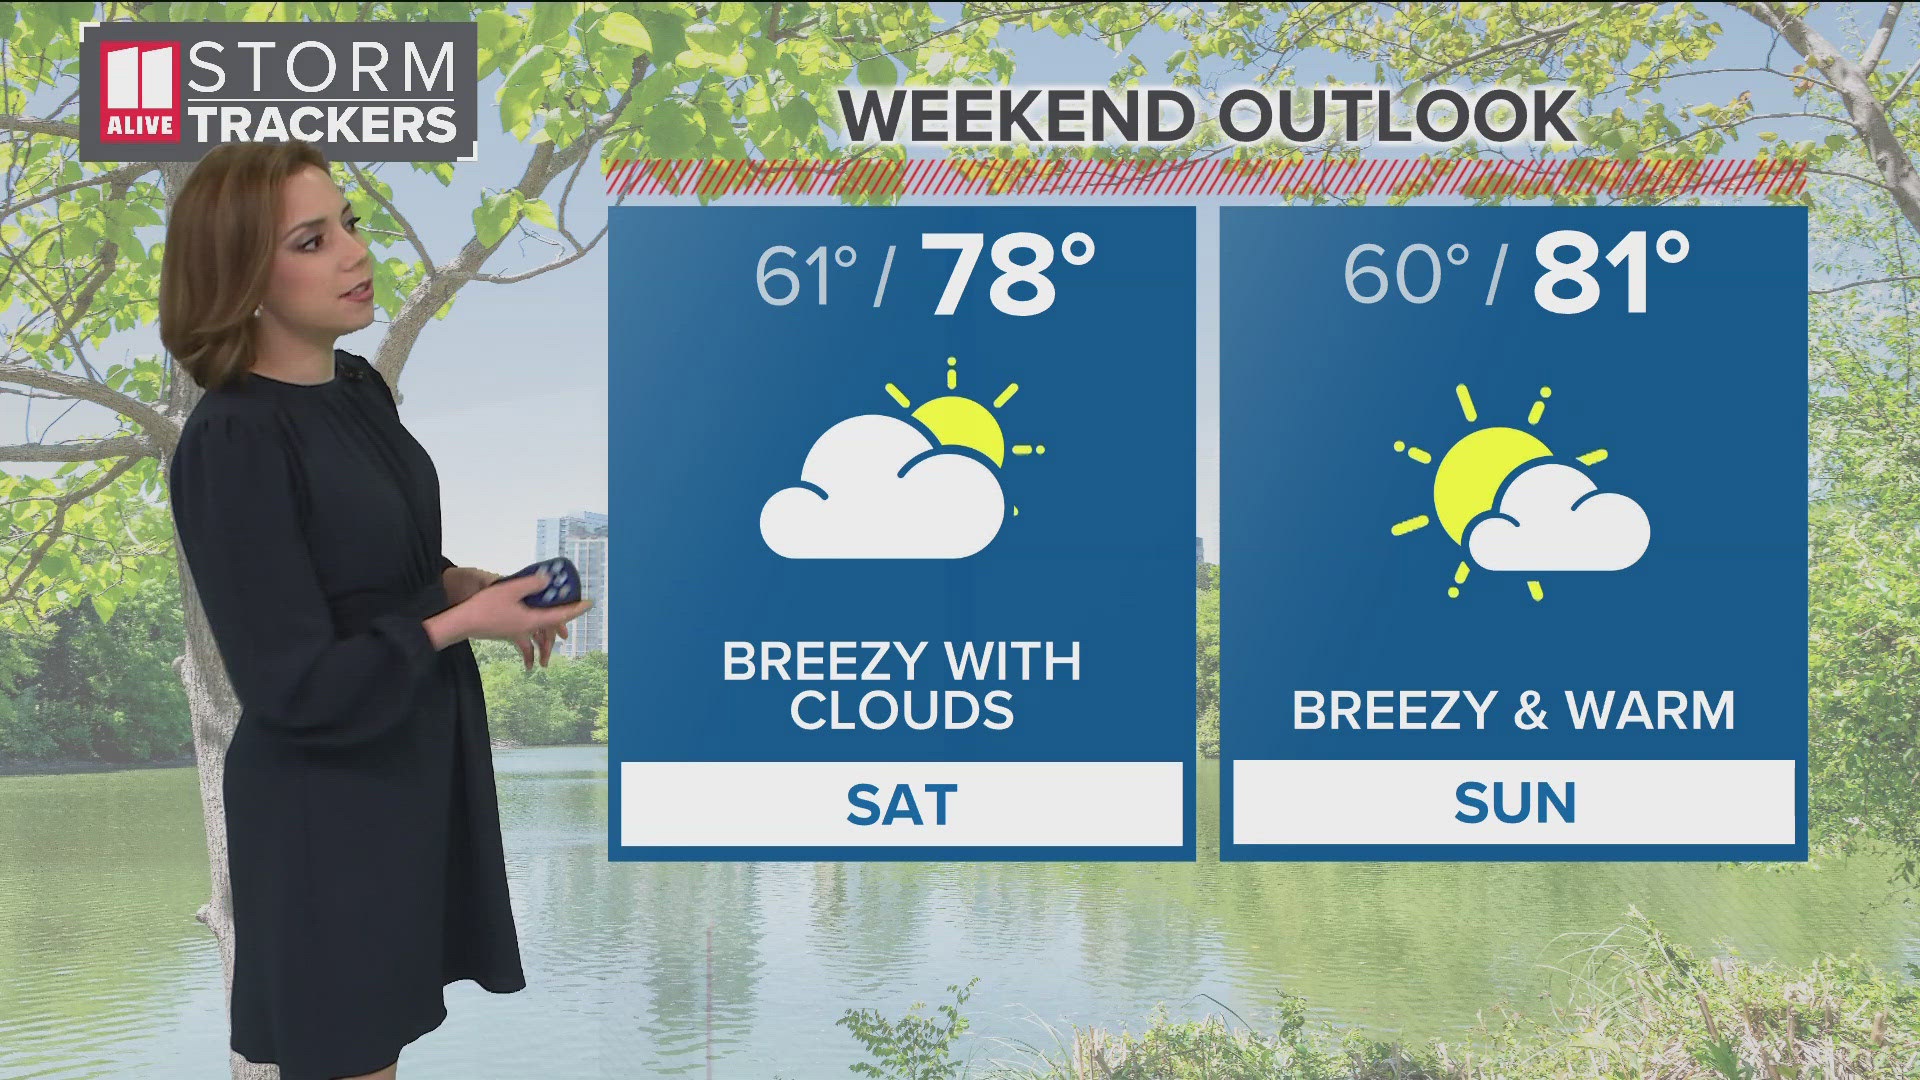 Warm weather this weekend and dry